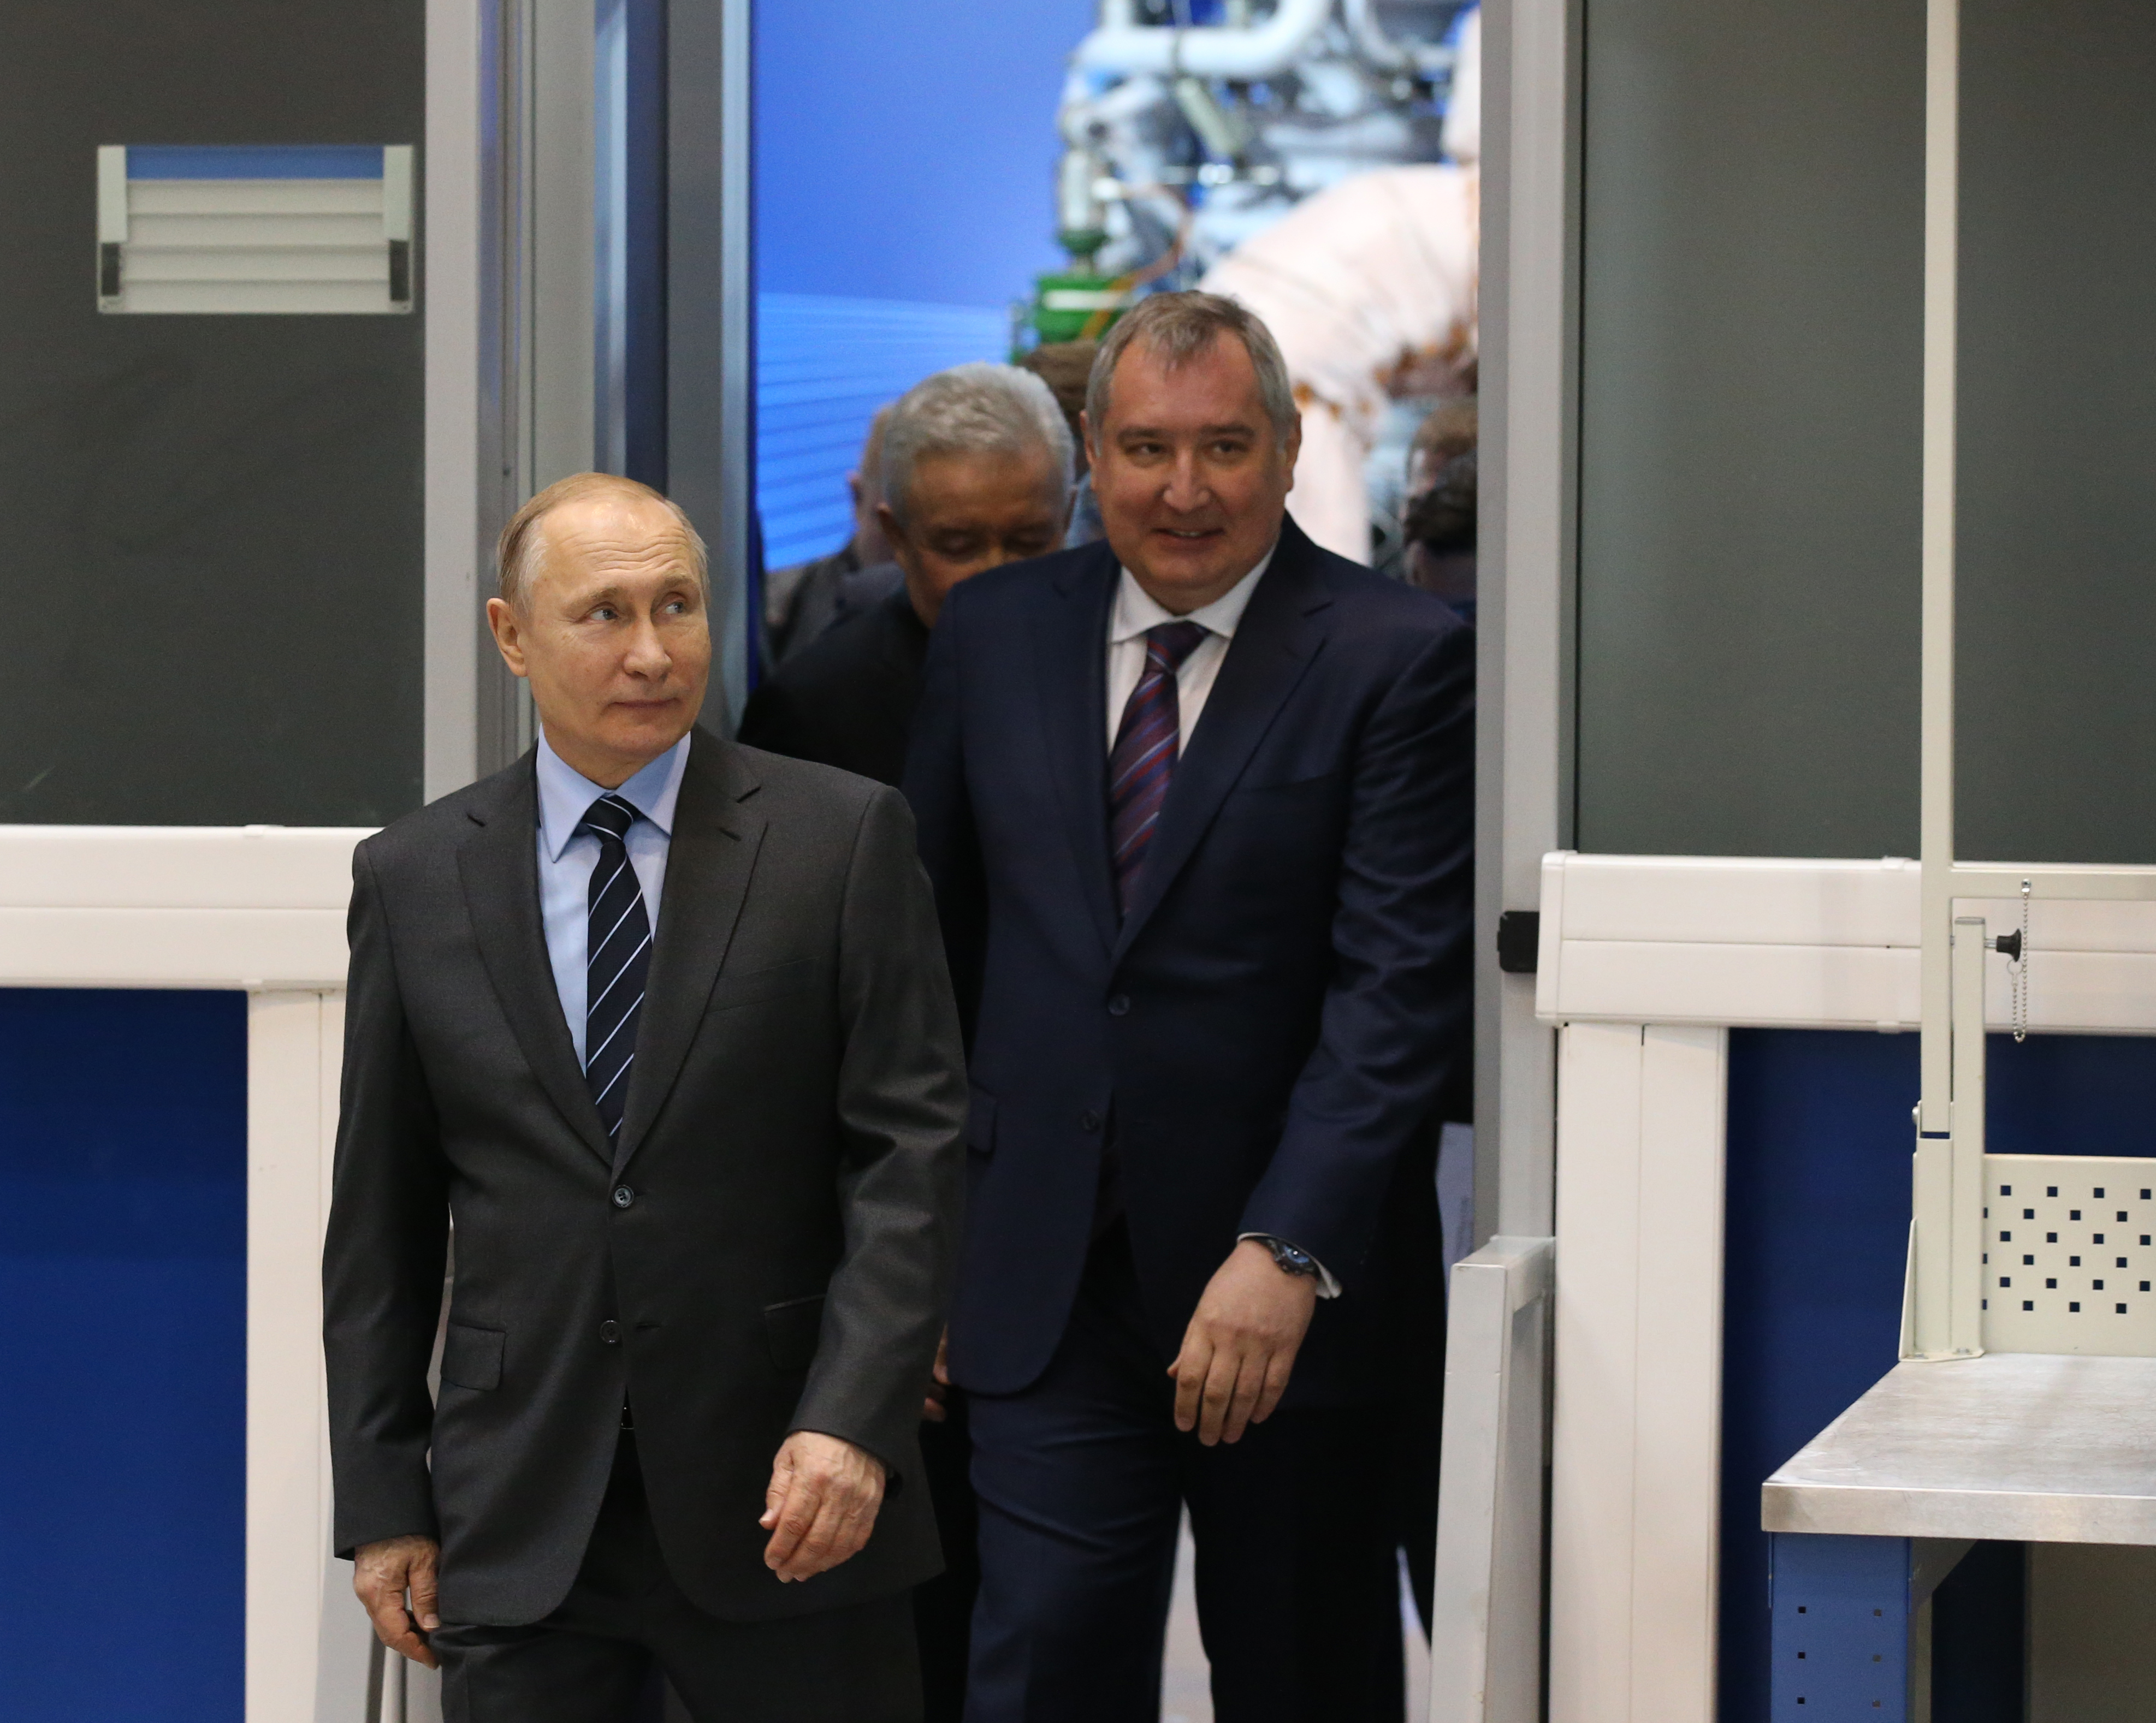 Russian President Vladimir Putin, followed by Roscosmos chief Dmitry Rogozin  enters the hall while visiting NPO Enegromash, a major Russian rocket manufacturer, in Khimki, 
                      northwest of Moscow. (Getty Images; 2019 Mikhail Svetlov)